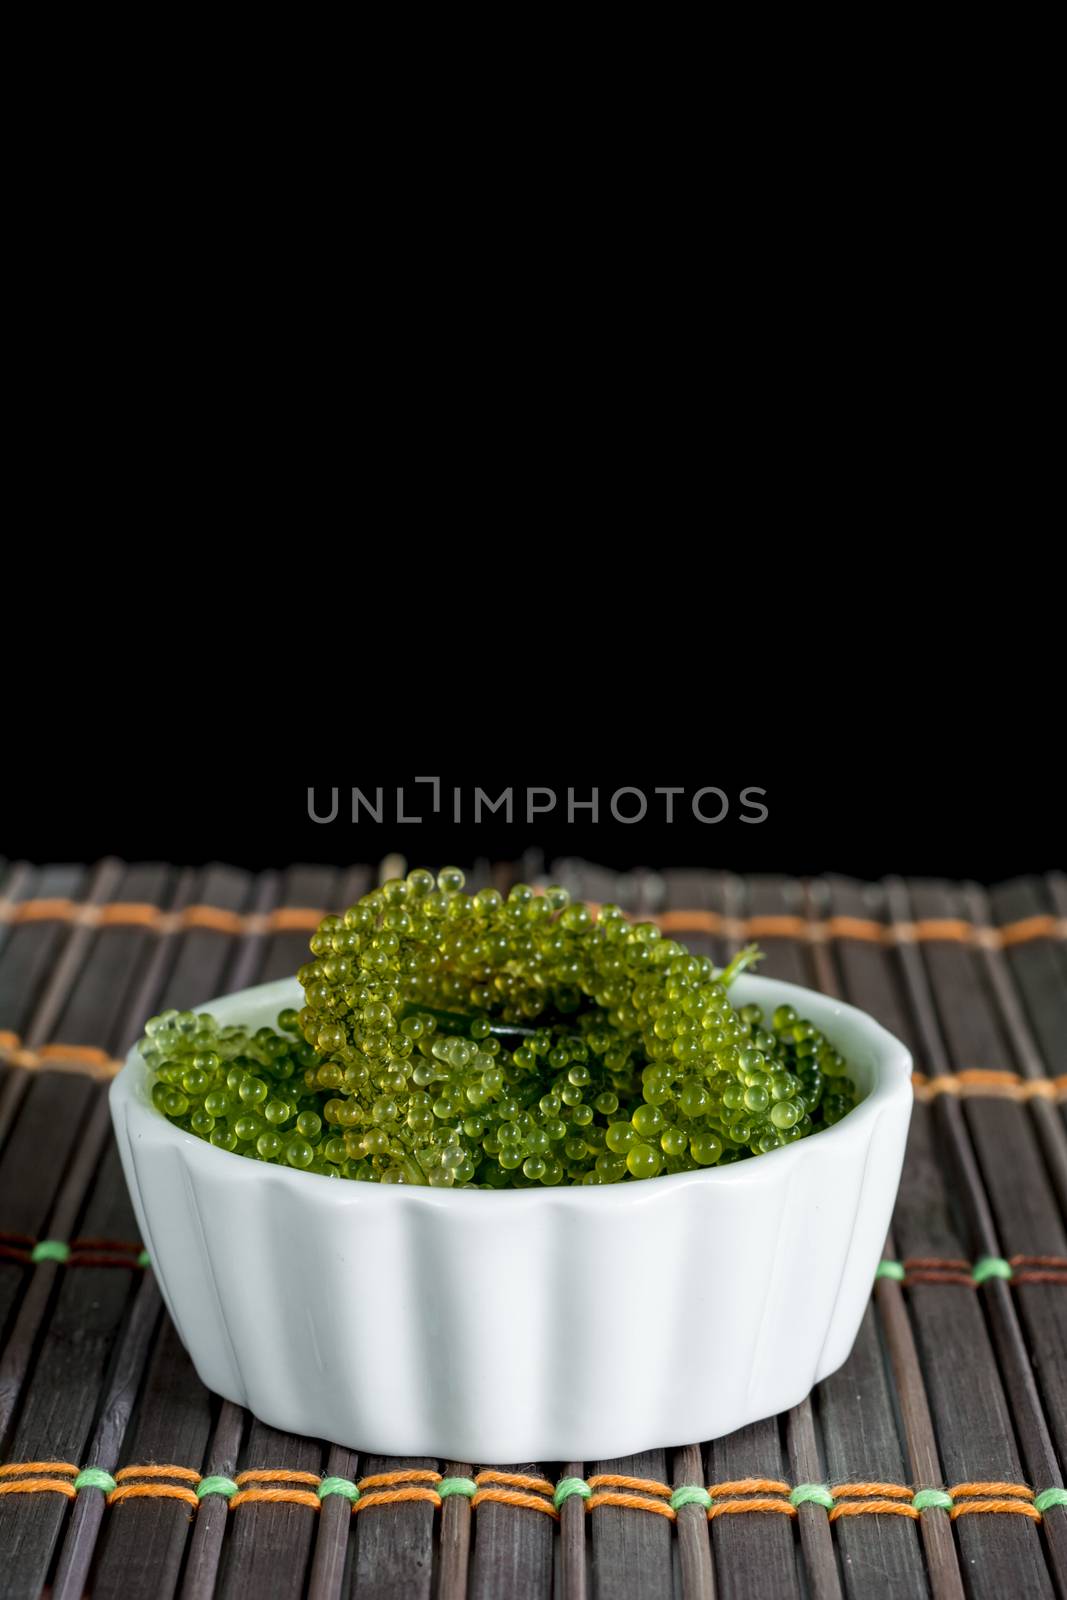 Fresh sea grapes or caviar seaweed in white bowl on wooden mat and black background. Healthy food concept.